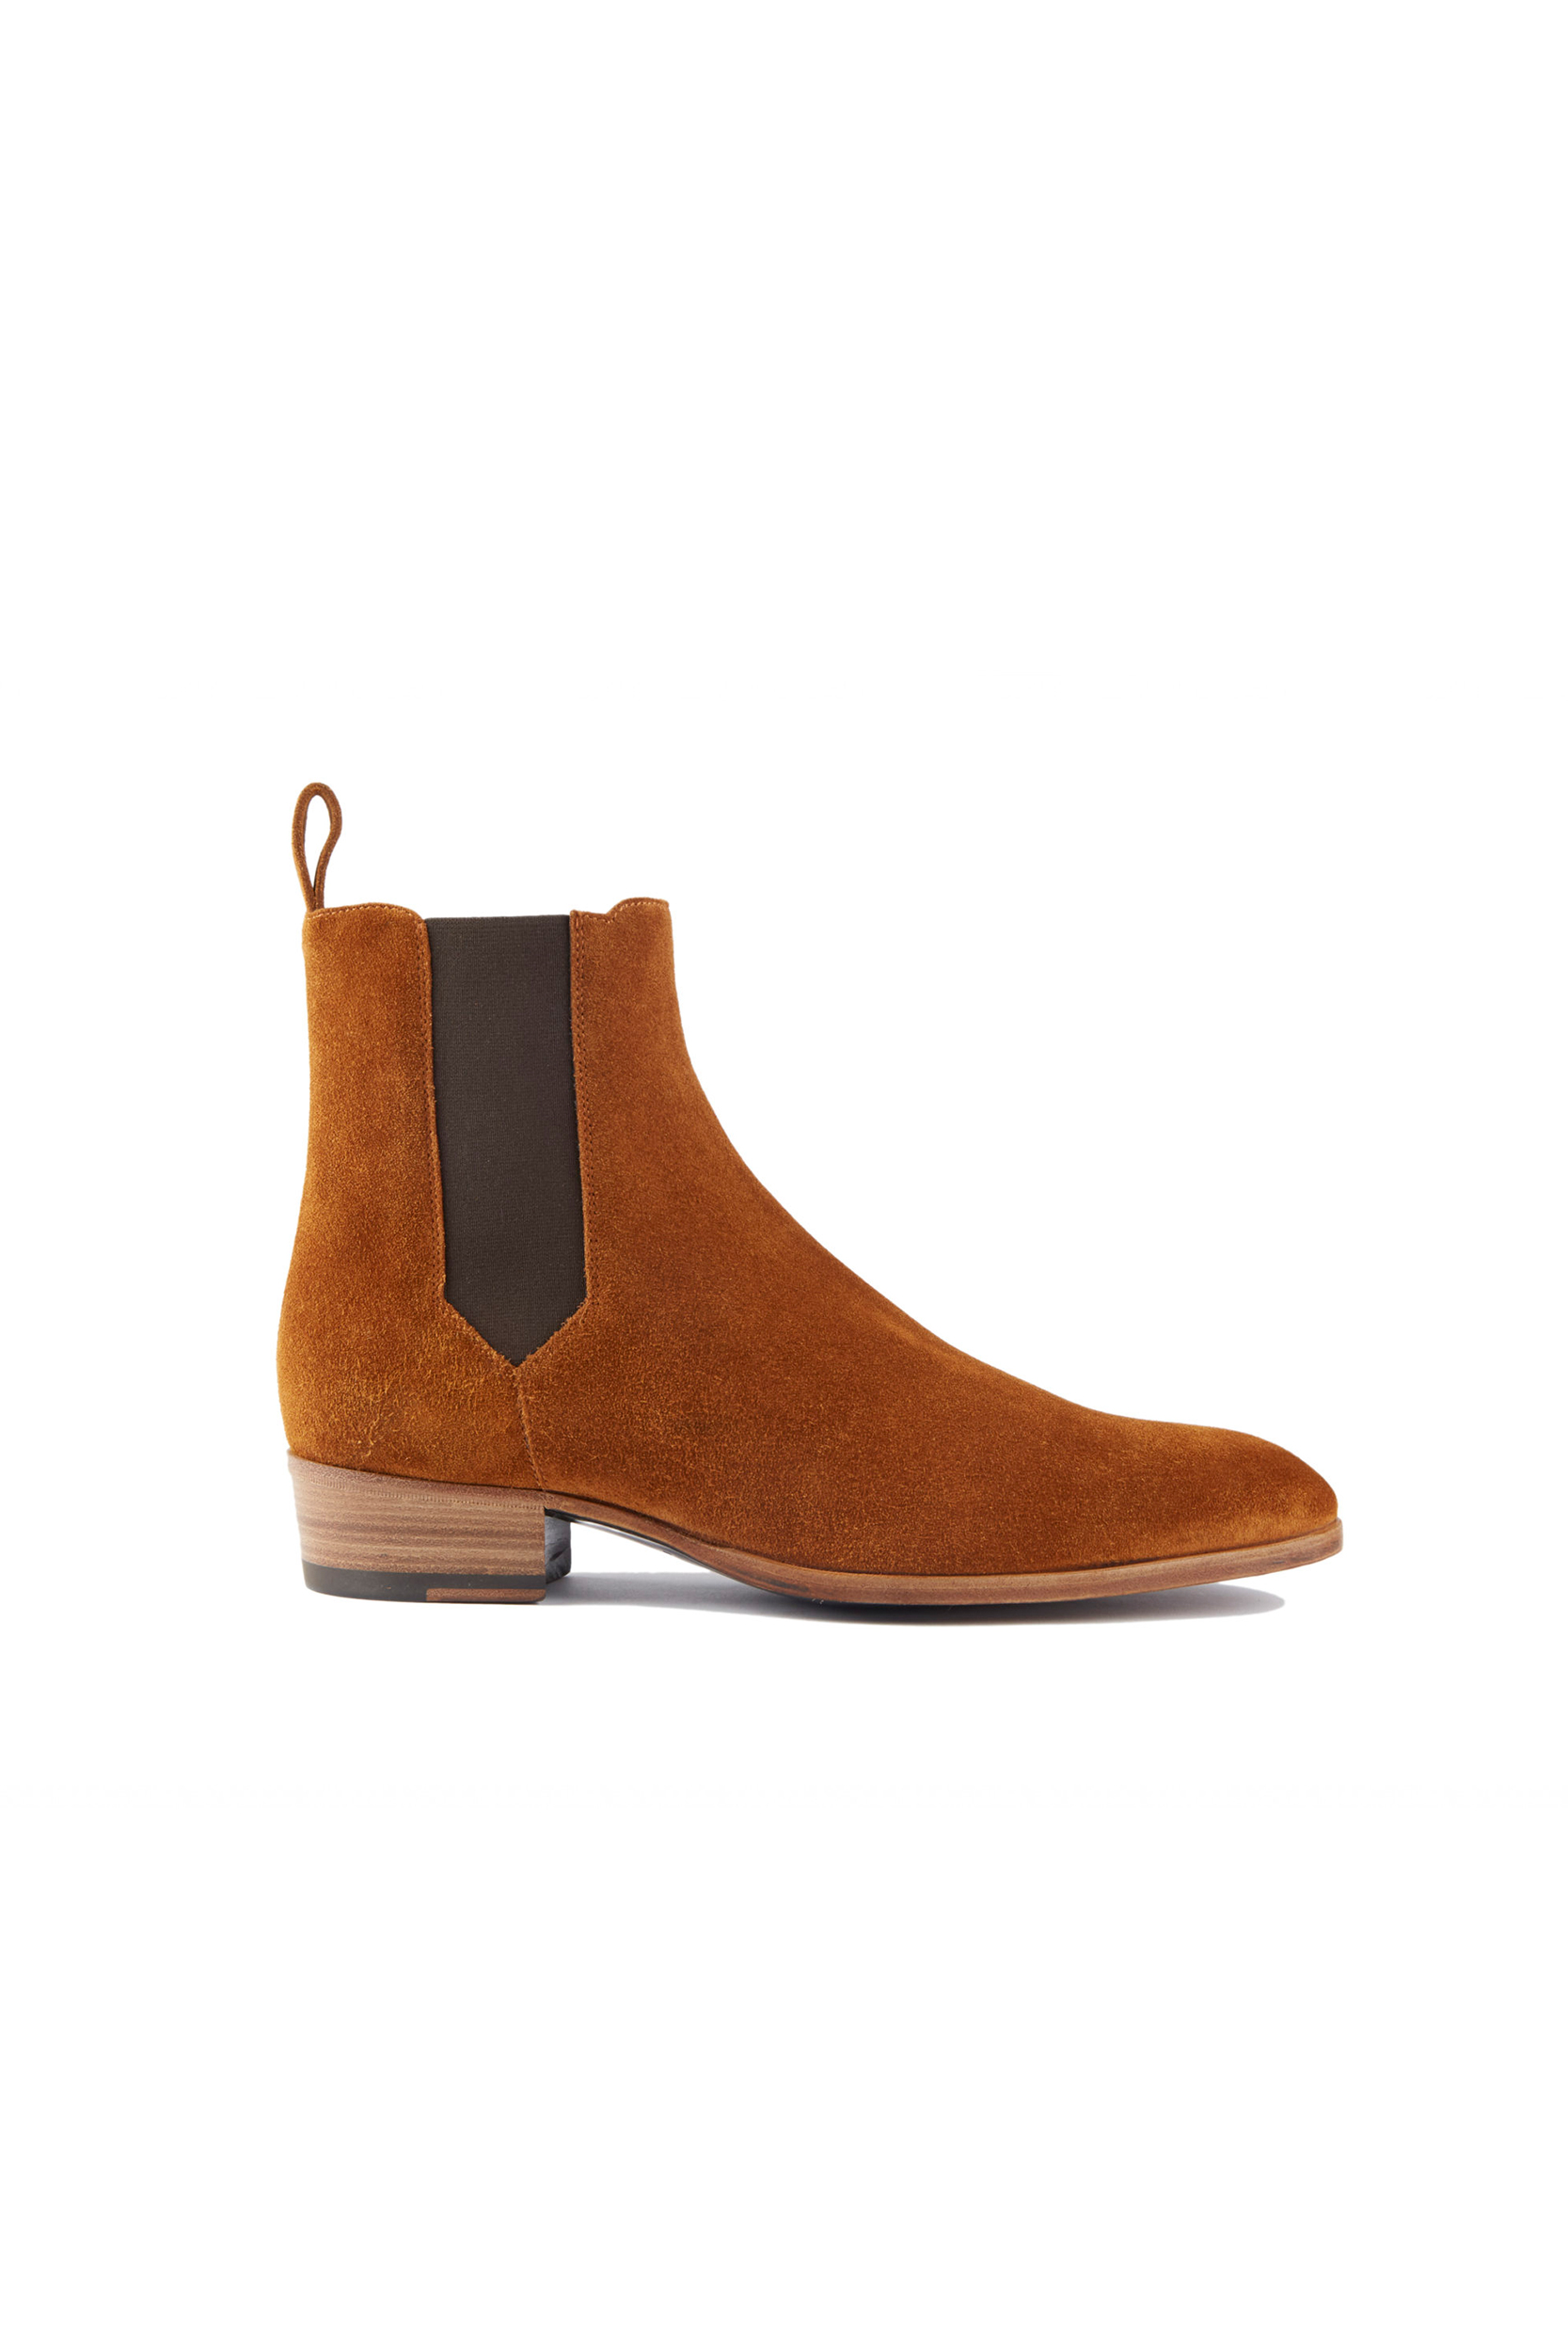 Stendhal Tobacco Suede Chelsea Boots - Barbanera